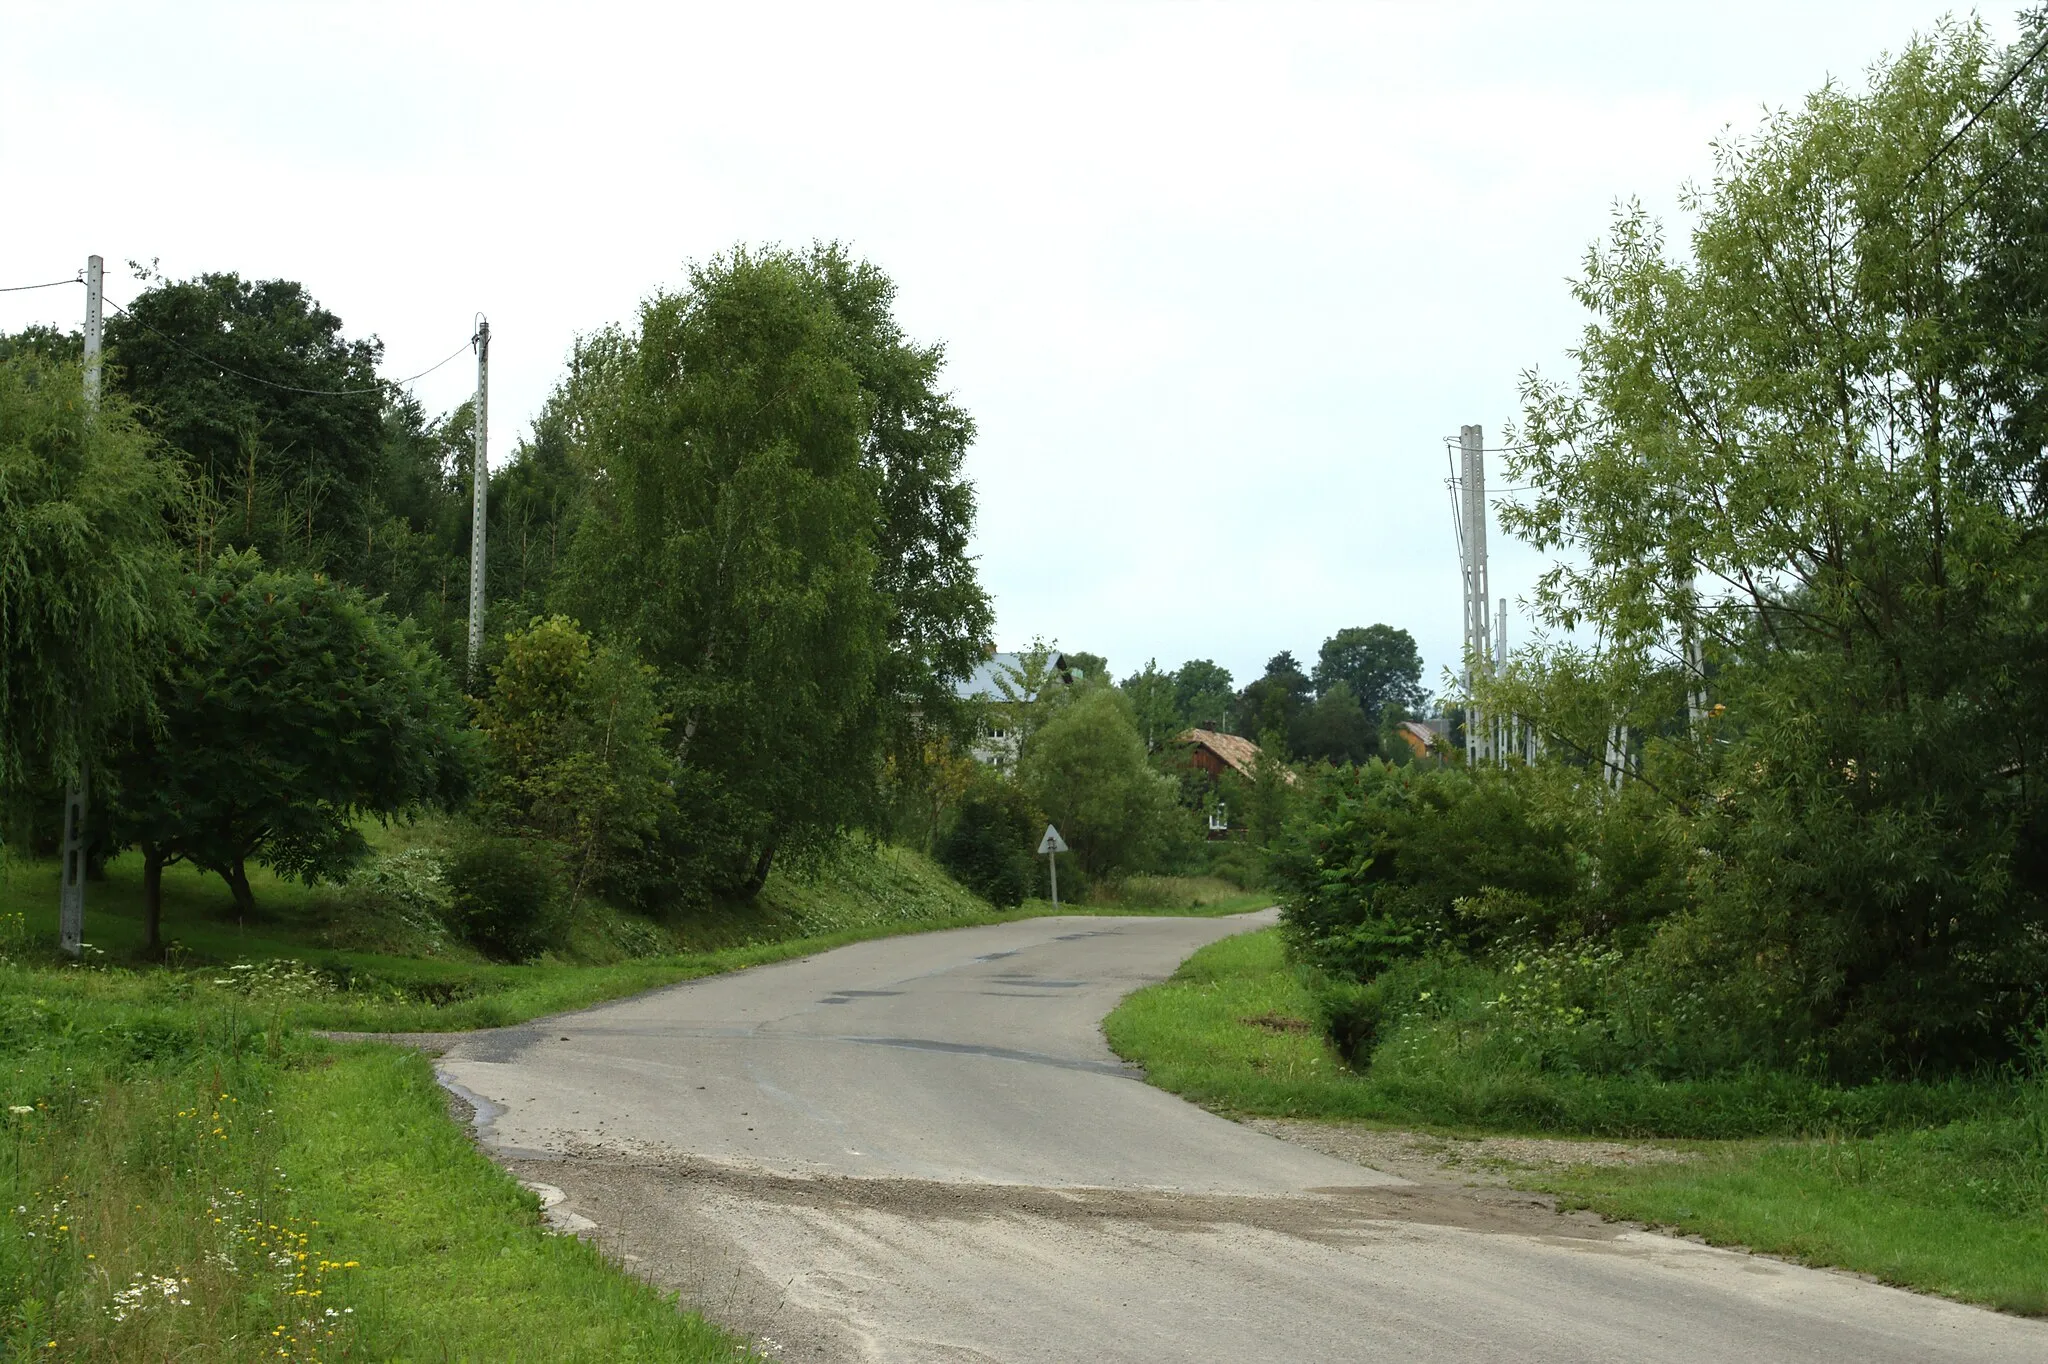 Photo showing: A turn in the middle of the village of Wydrna, Podkarpackie voivodeship, Poland